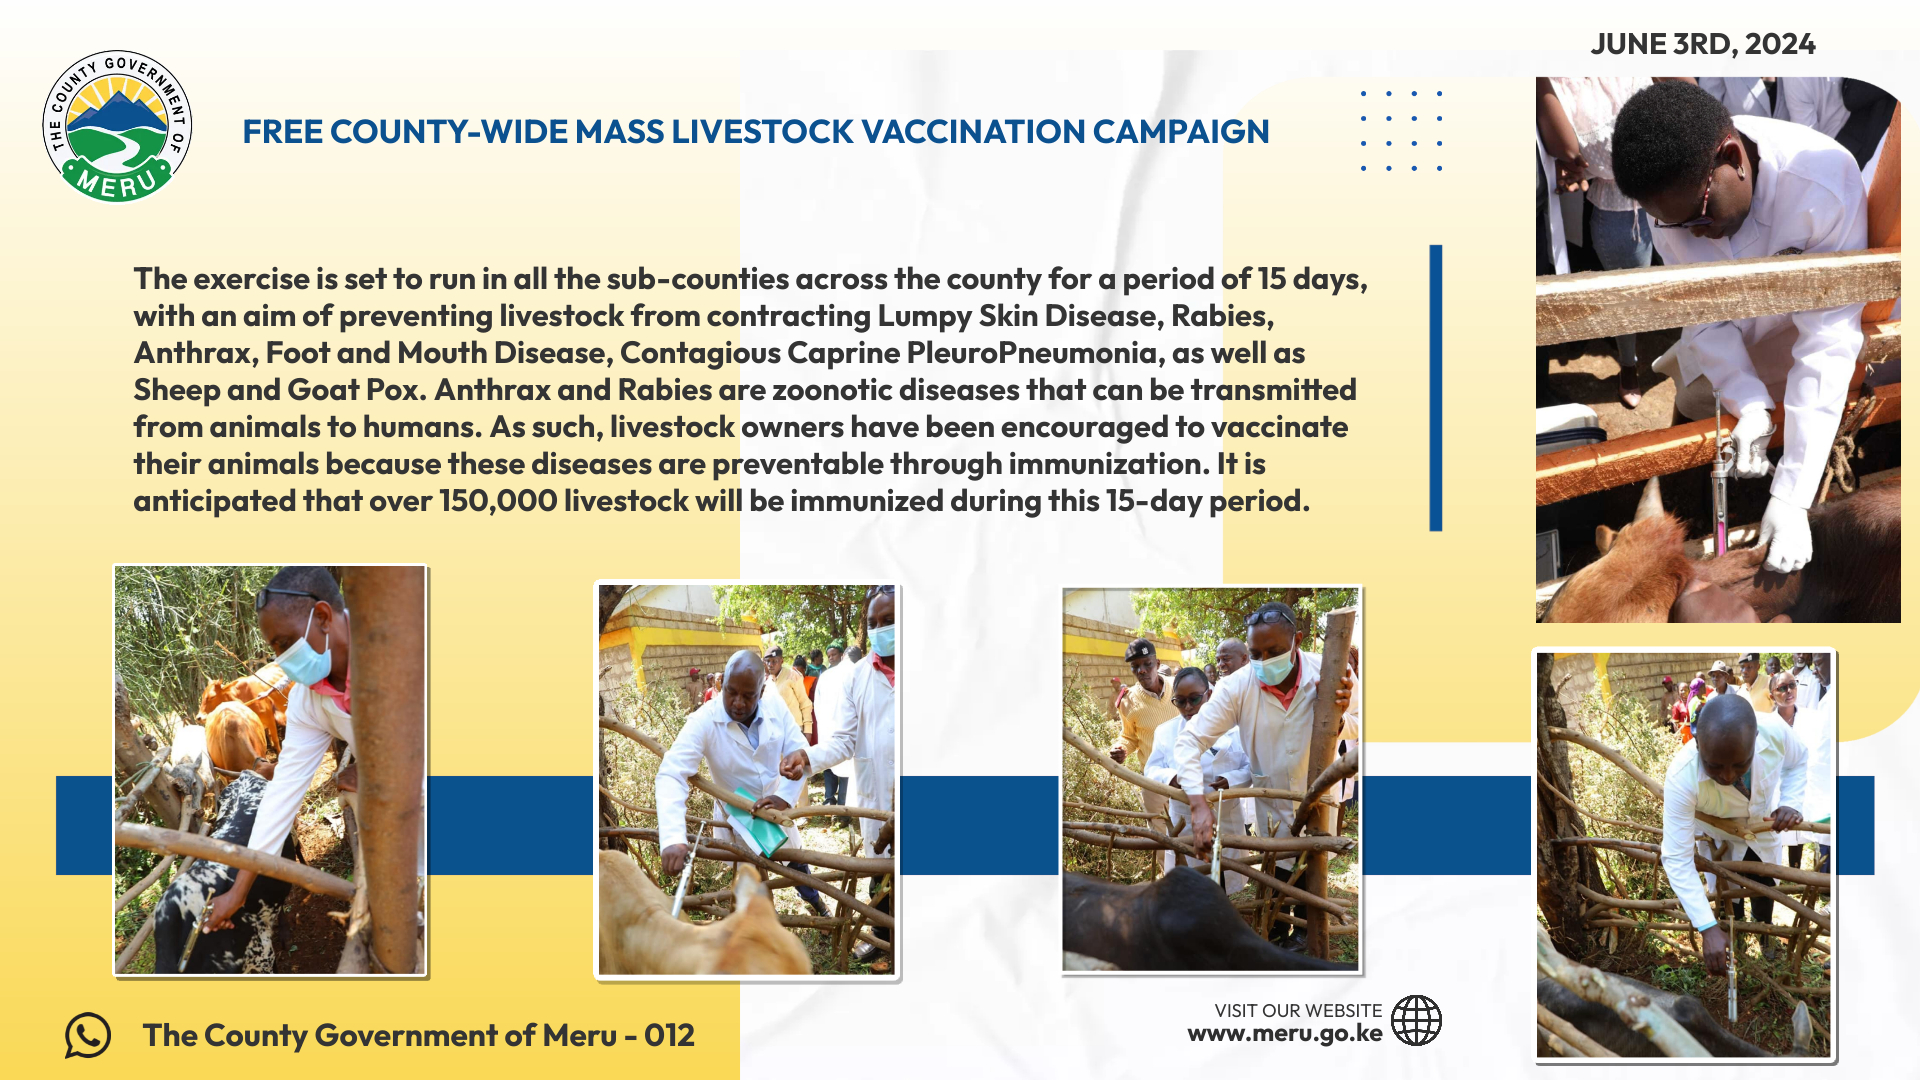 FREE COUNTY-WIDE MASS LIVESTOCK VACCINATION CAMPAIGN